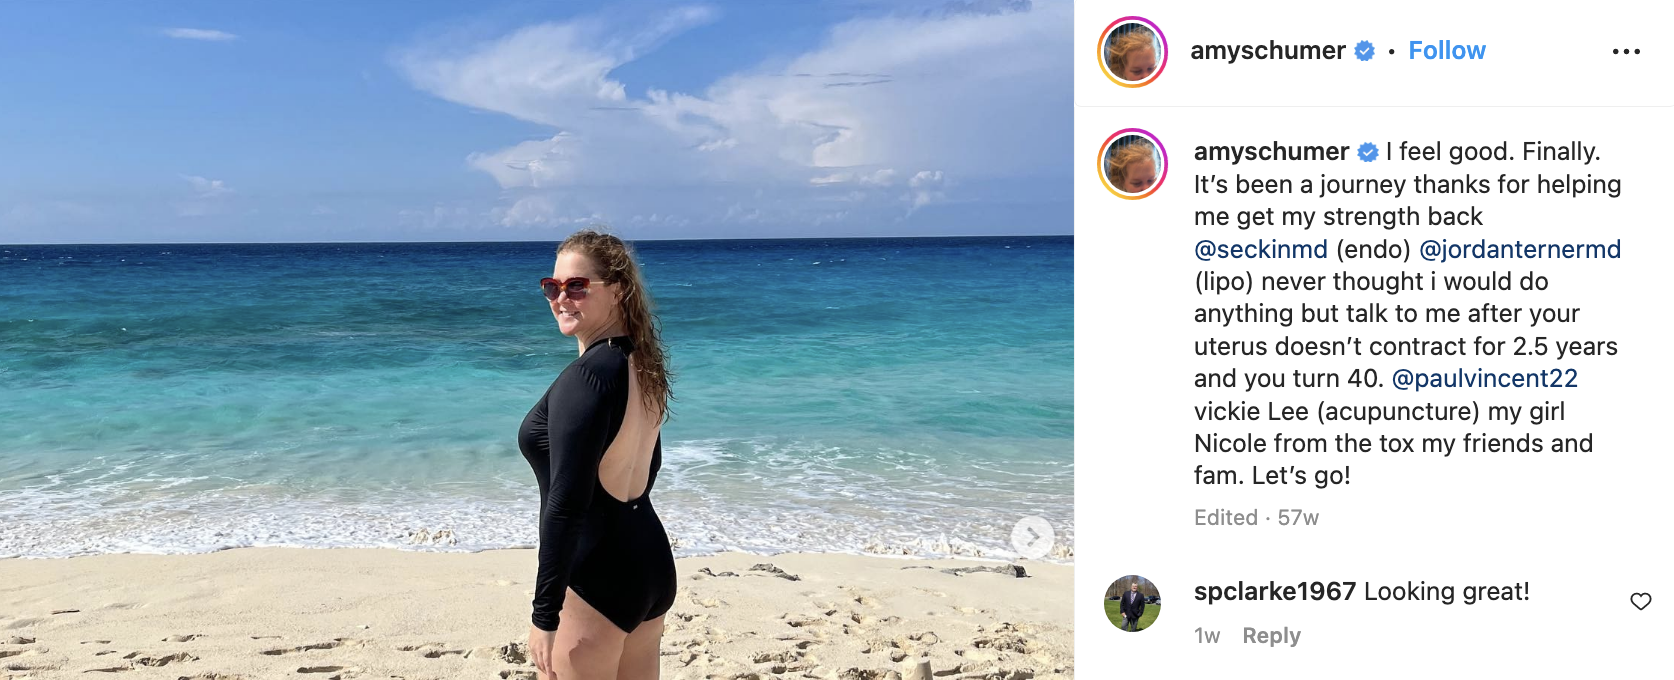 Amy smiling on the beach in an IG post, with a caption about how she feels good and it&#x27;s been a journey getting her strength back, and mentioning Dr Terner